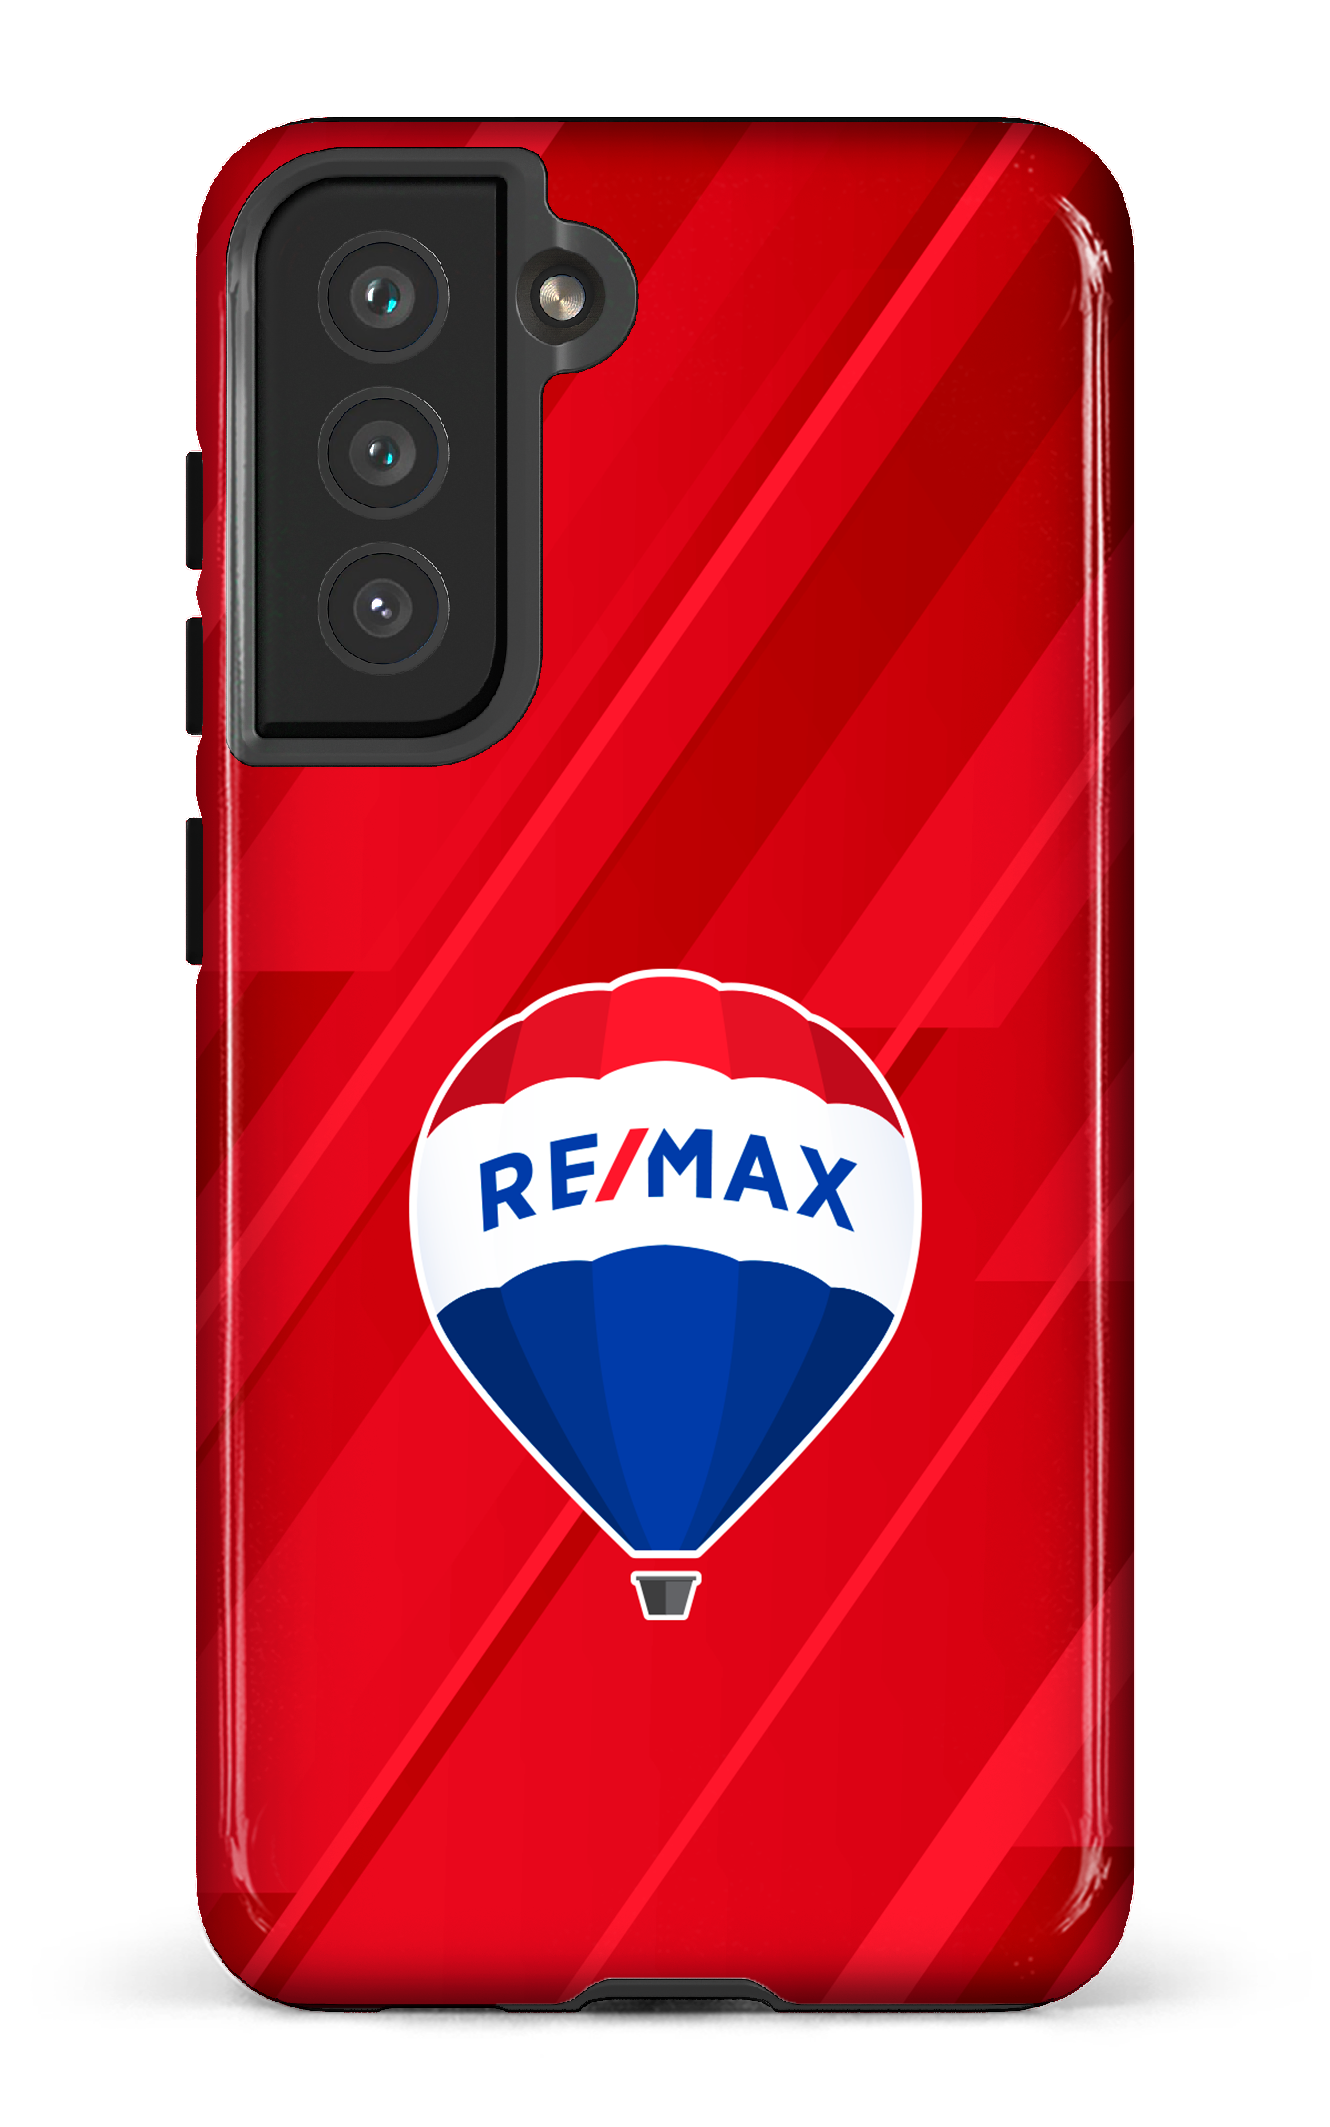 Remax Rouge - Galaxy S21 FE